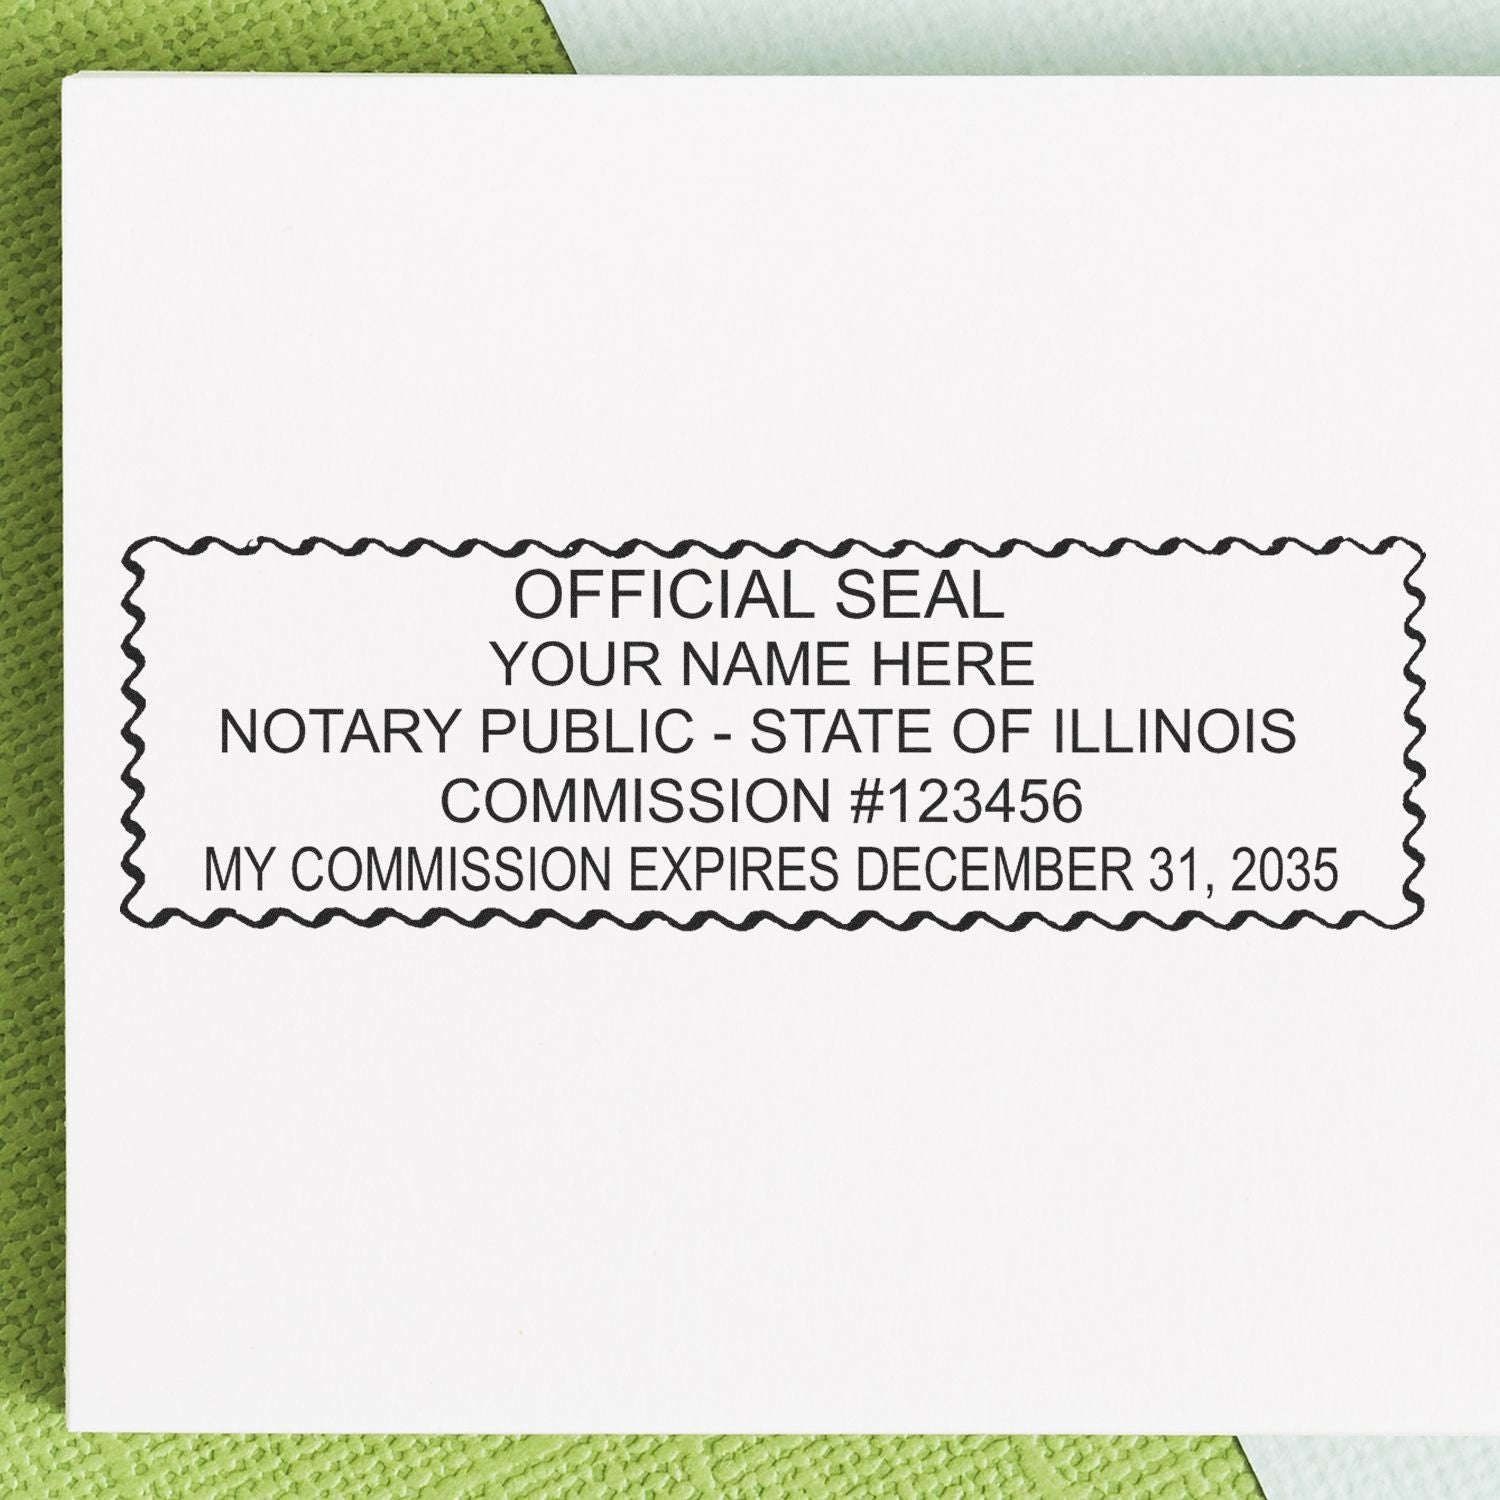 The PSI Illinois Notary Stamp stamp impression comes to life with a crisp, detailed photo on paper - showcasing true professional quality.